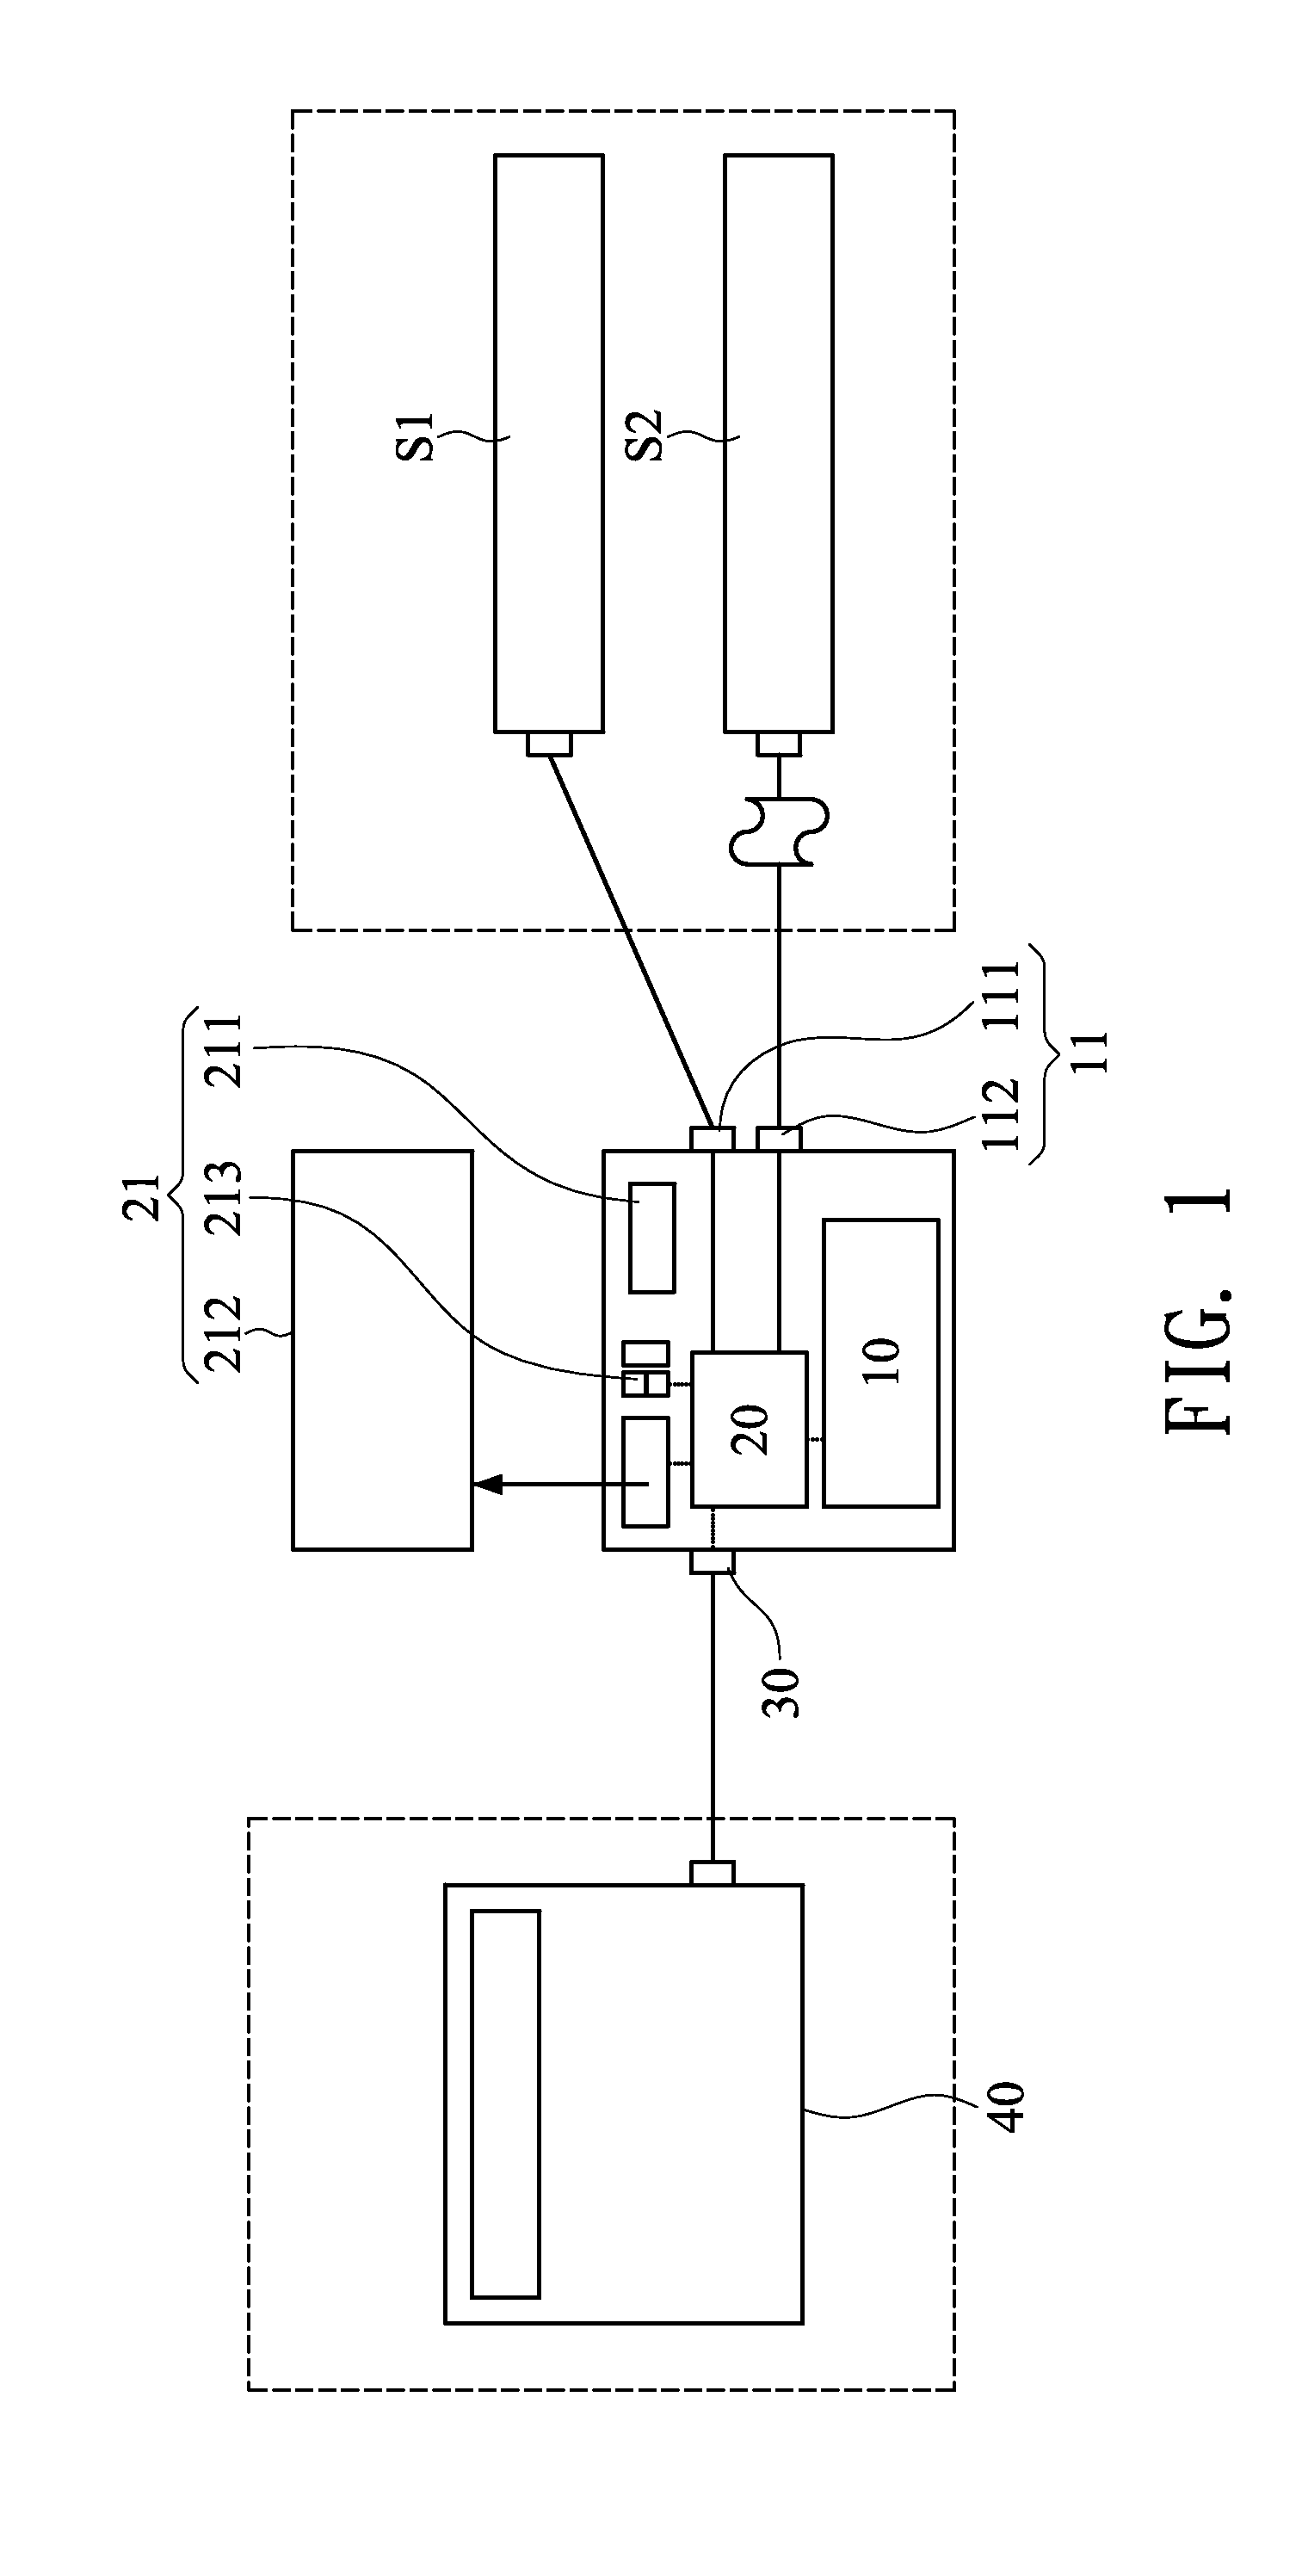 Device including a virtual drive system